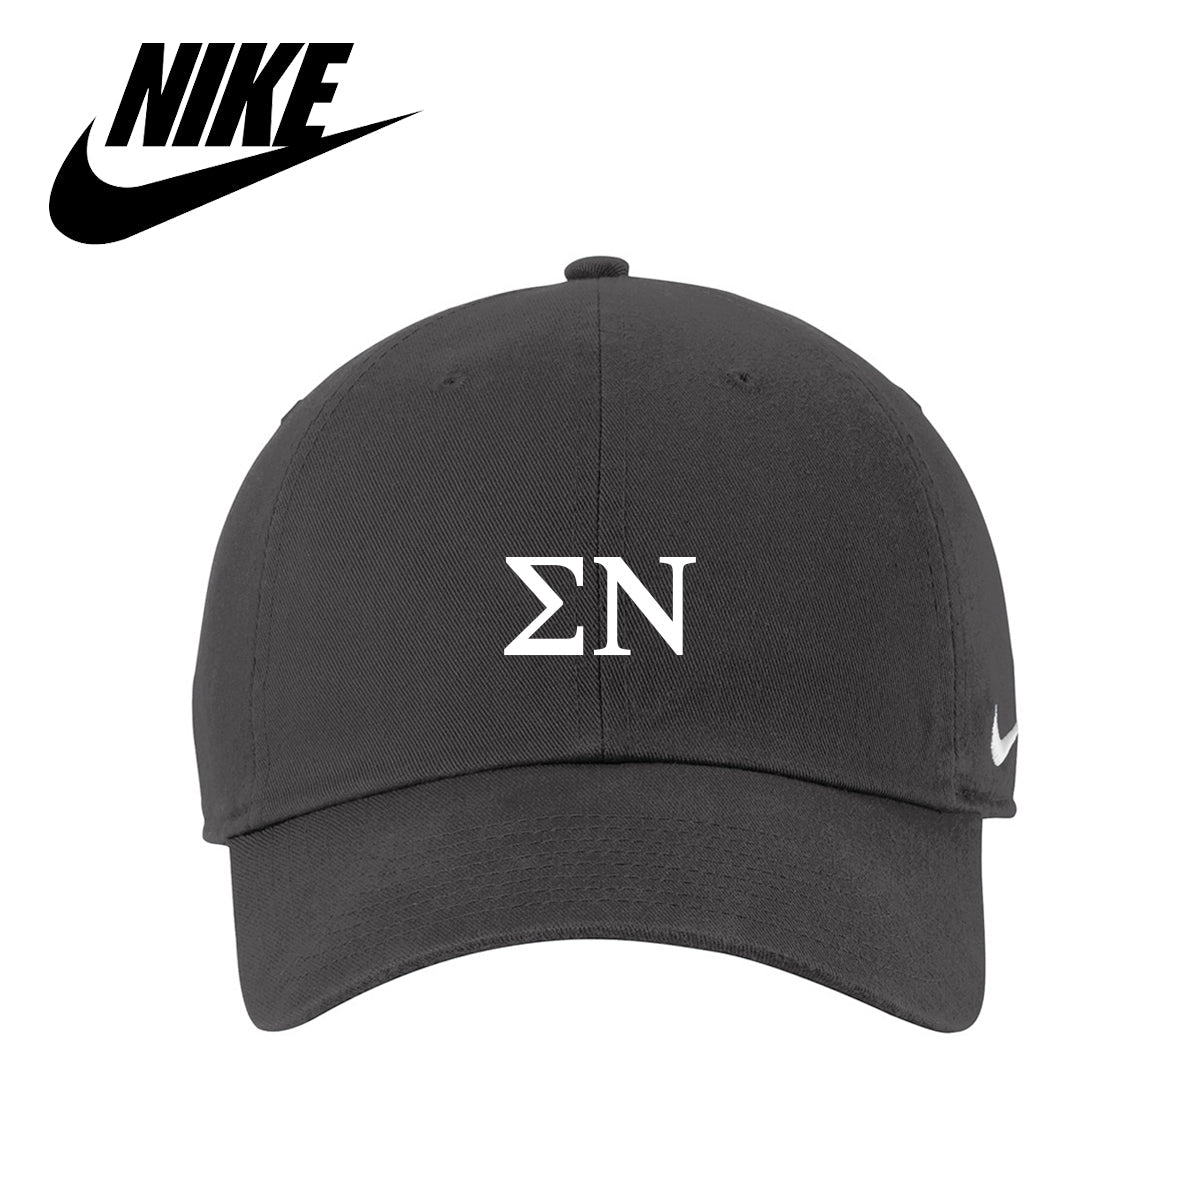 Sigma Nu Nike Heritage Hat With Greek Letters